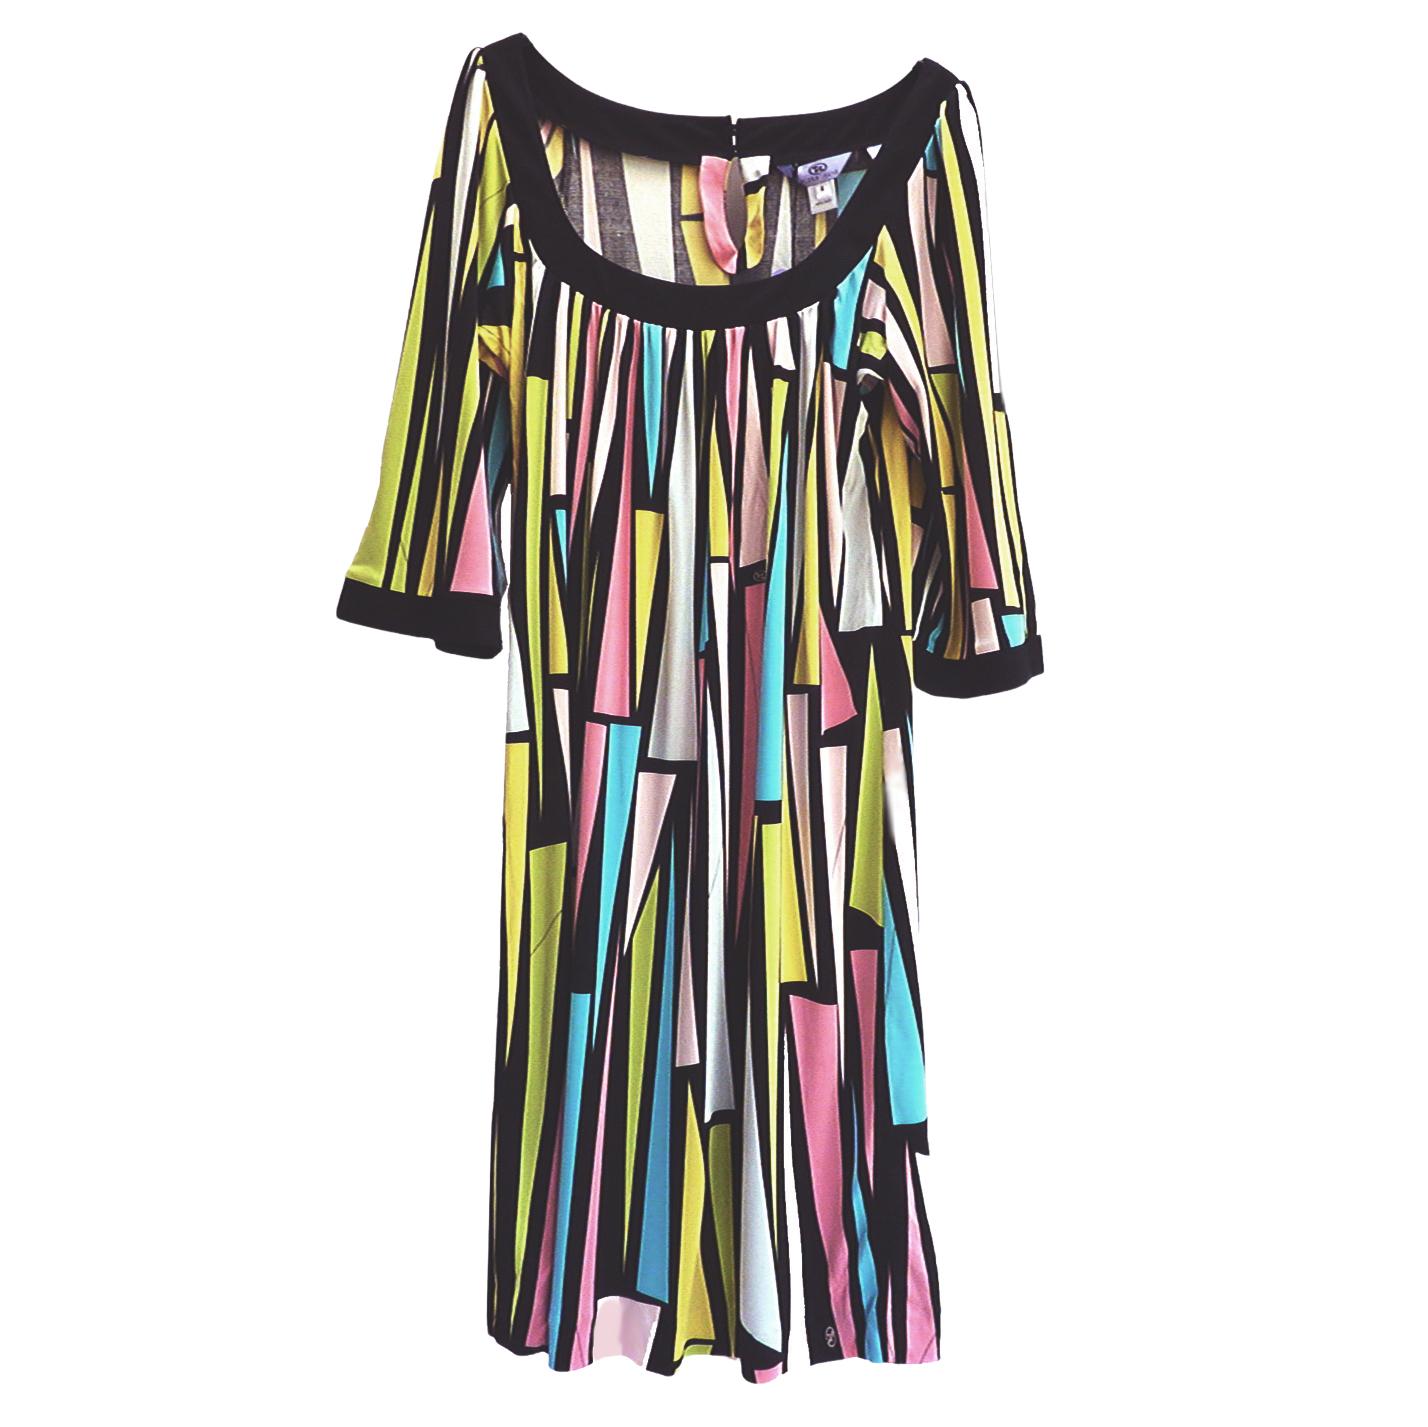 Flattering easy dress that can be dressed up or down.
(Psst ... This is the same FLORA KUNG style that Kate Middleton wore to Annabel's London but in a different print) 
Approximately 38